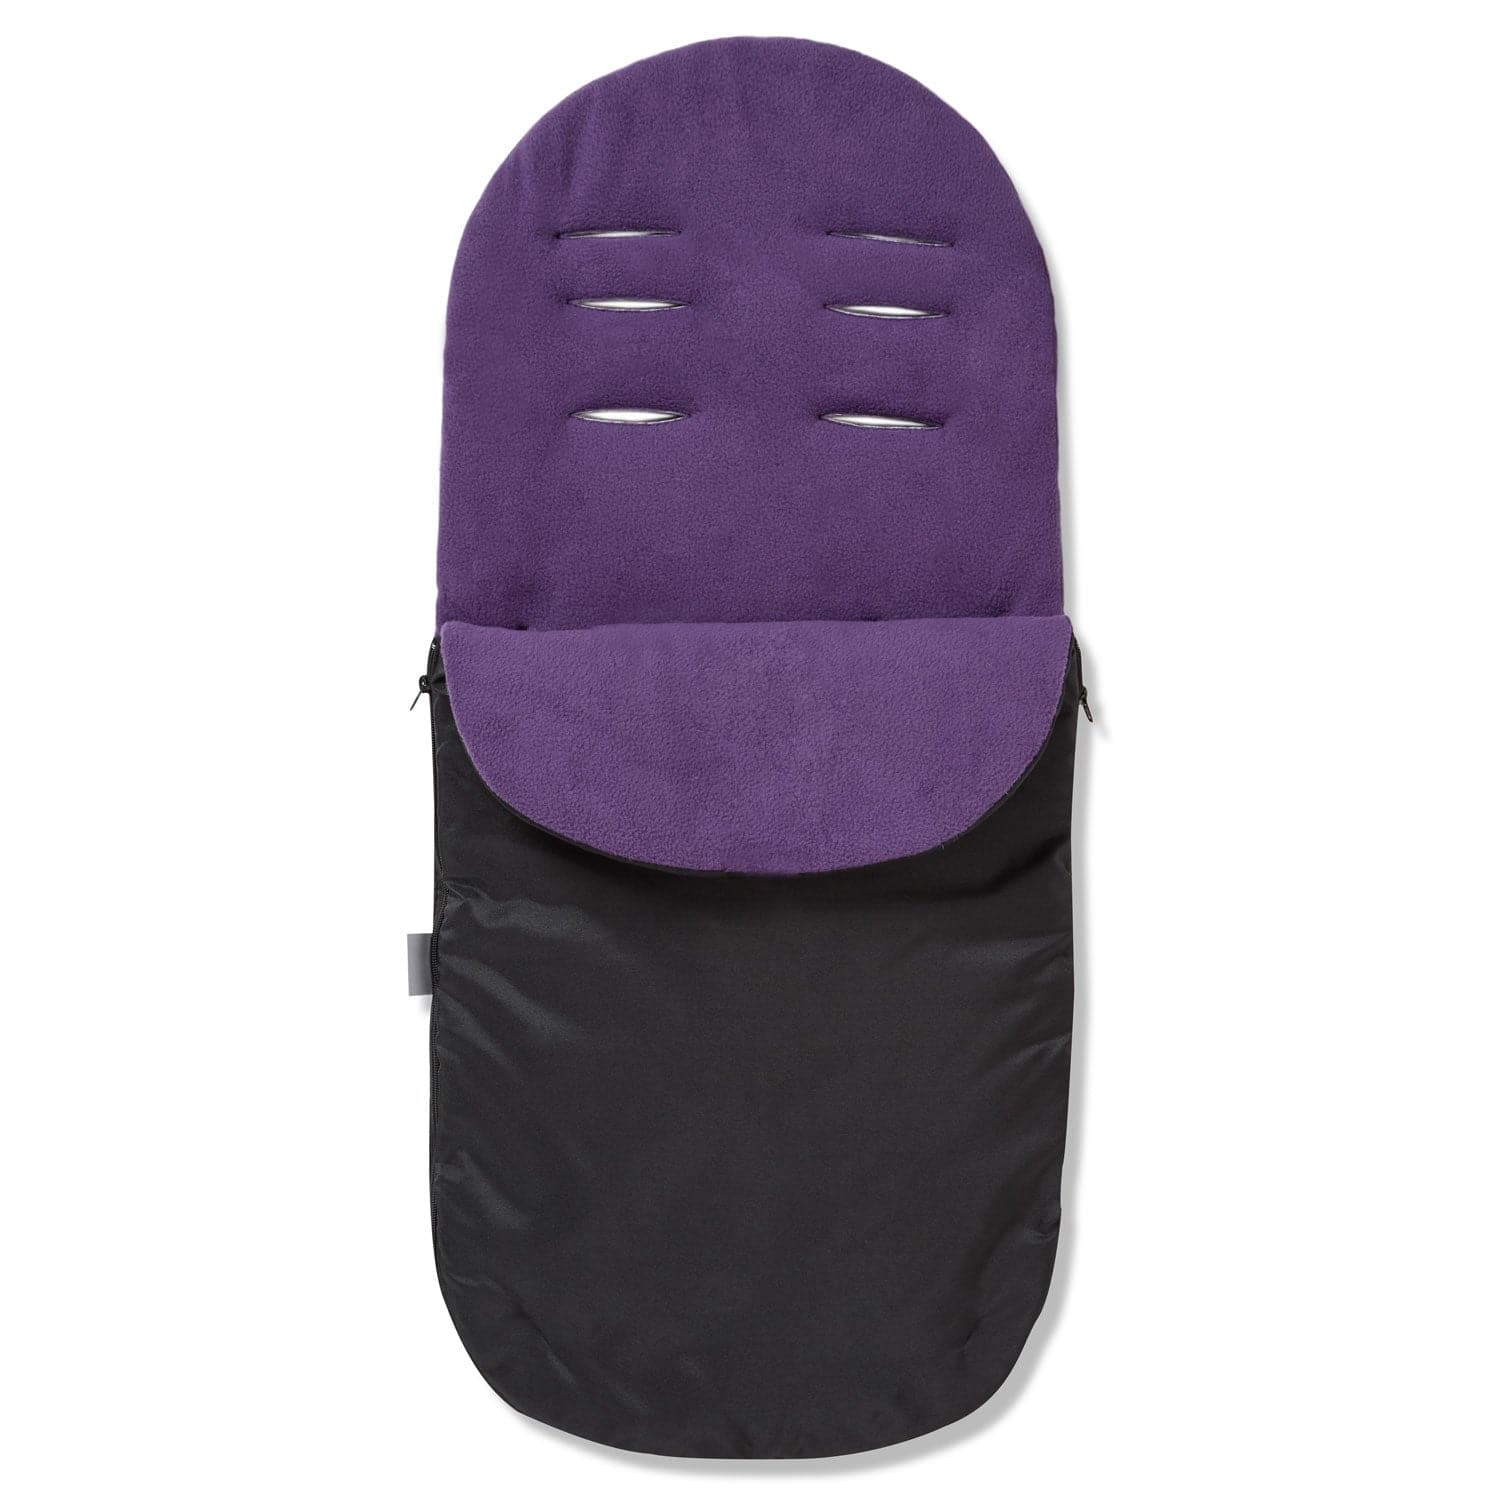 Footmuff / Cosy Toes Compatible with Red Kite - Purple / Fits All Models | For Your Little One